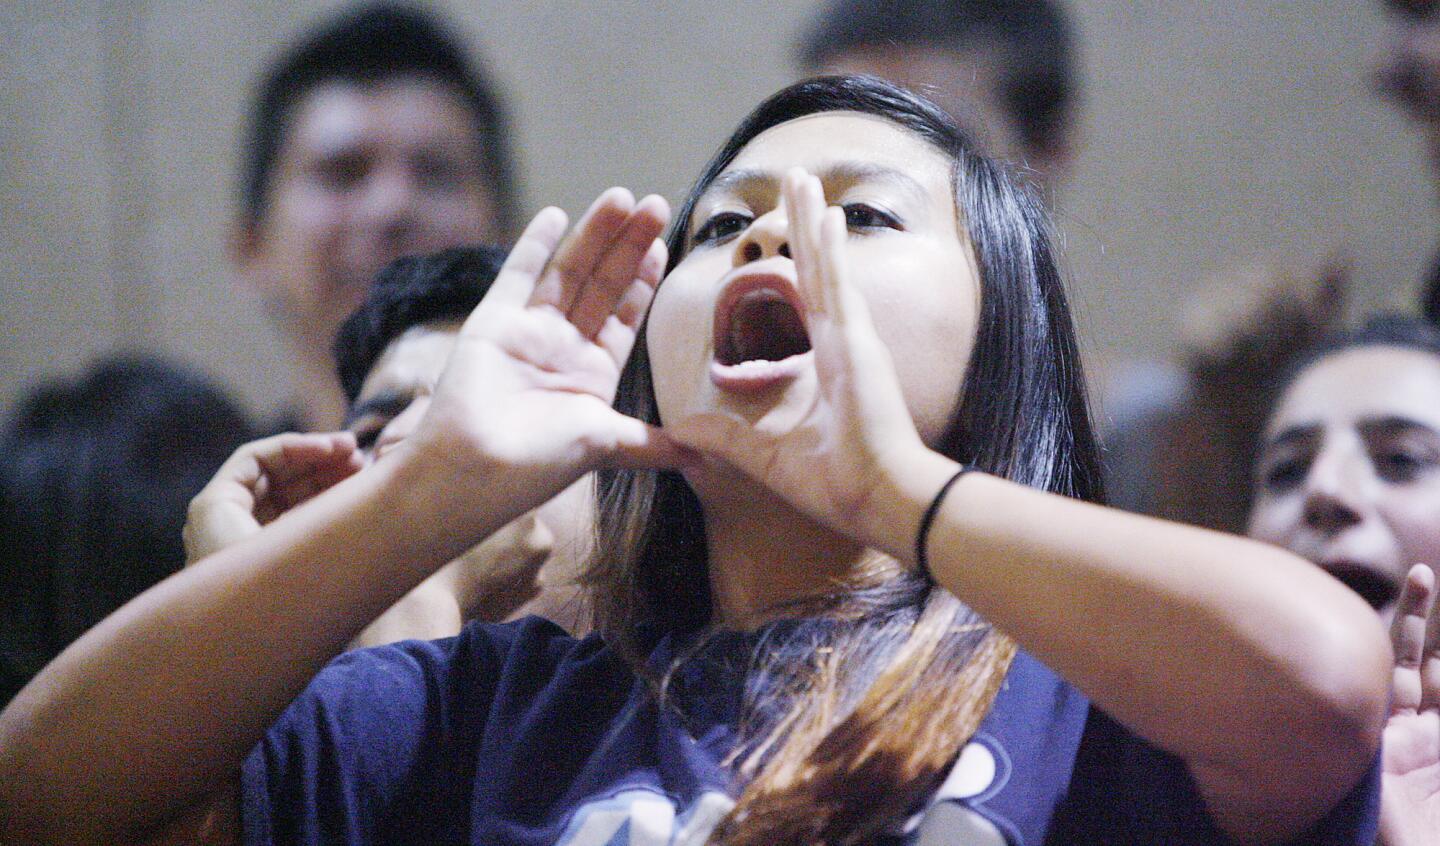 Photo Gallery: Burbank v. Burroughs rival Pacific League girls volleyball